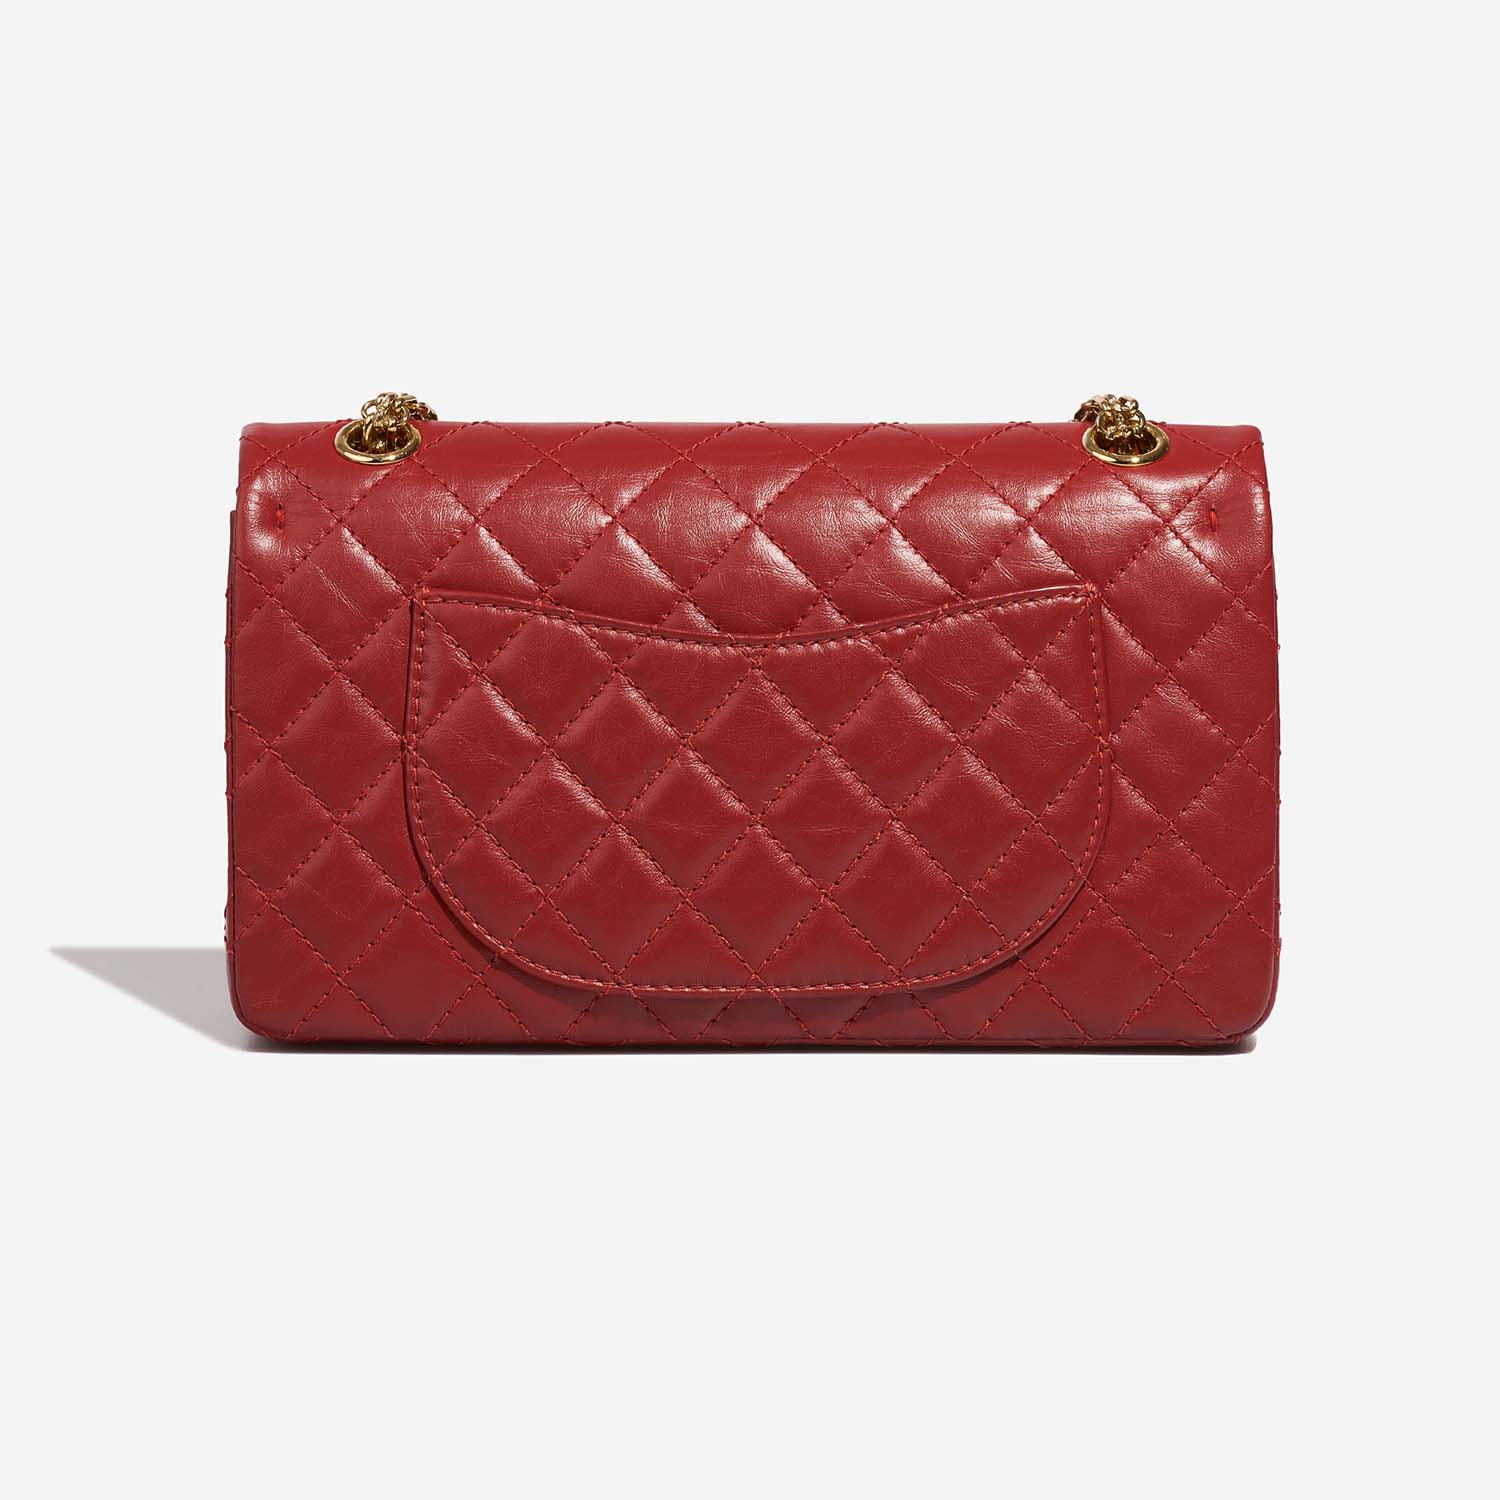 Chanel 2.55 Reissue 225 Lamb Red